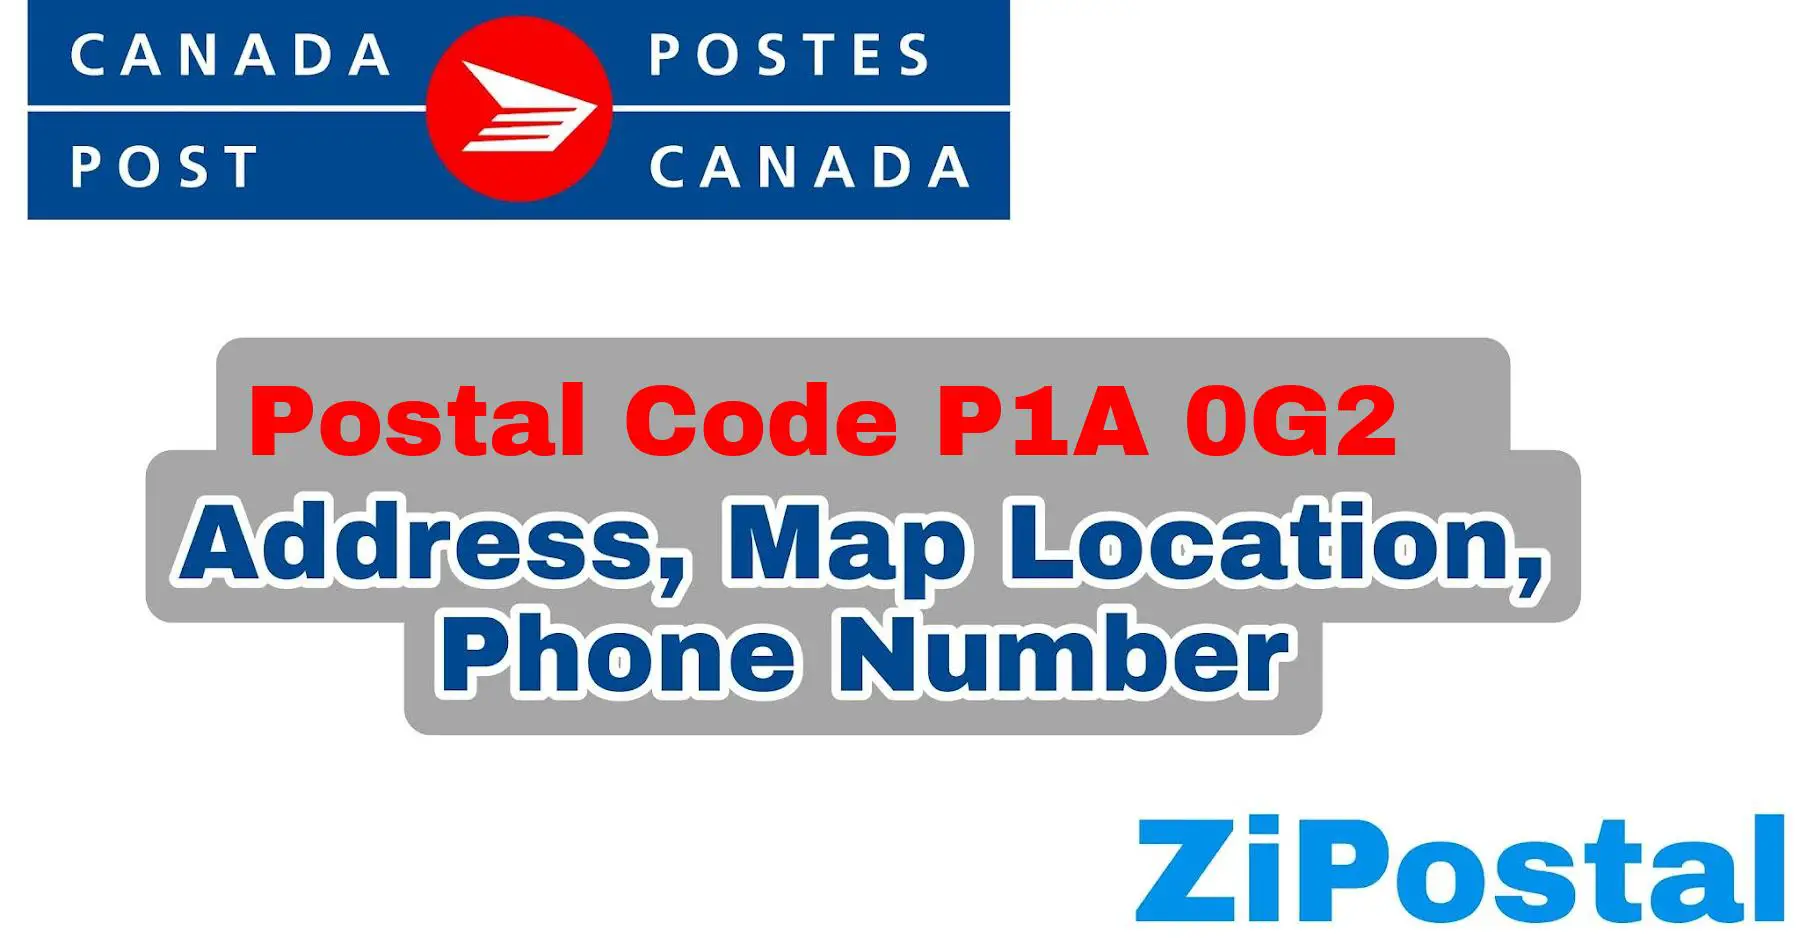 Postal Code P1A 0G2 Address Map Location and Phone Number